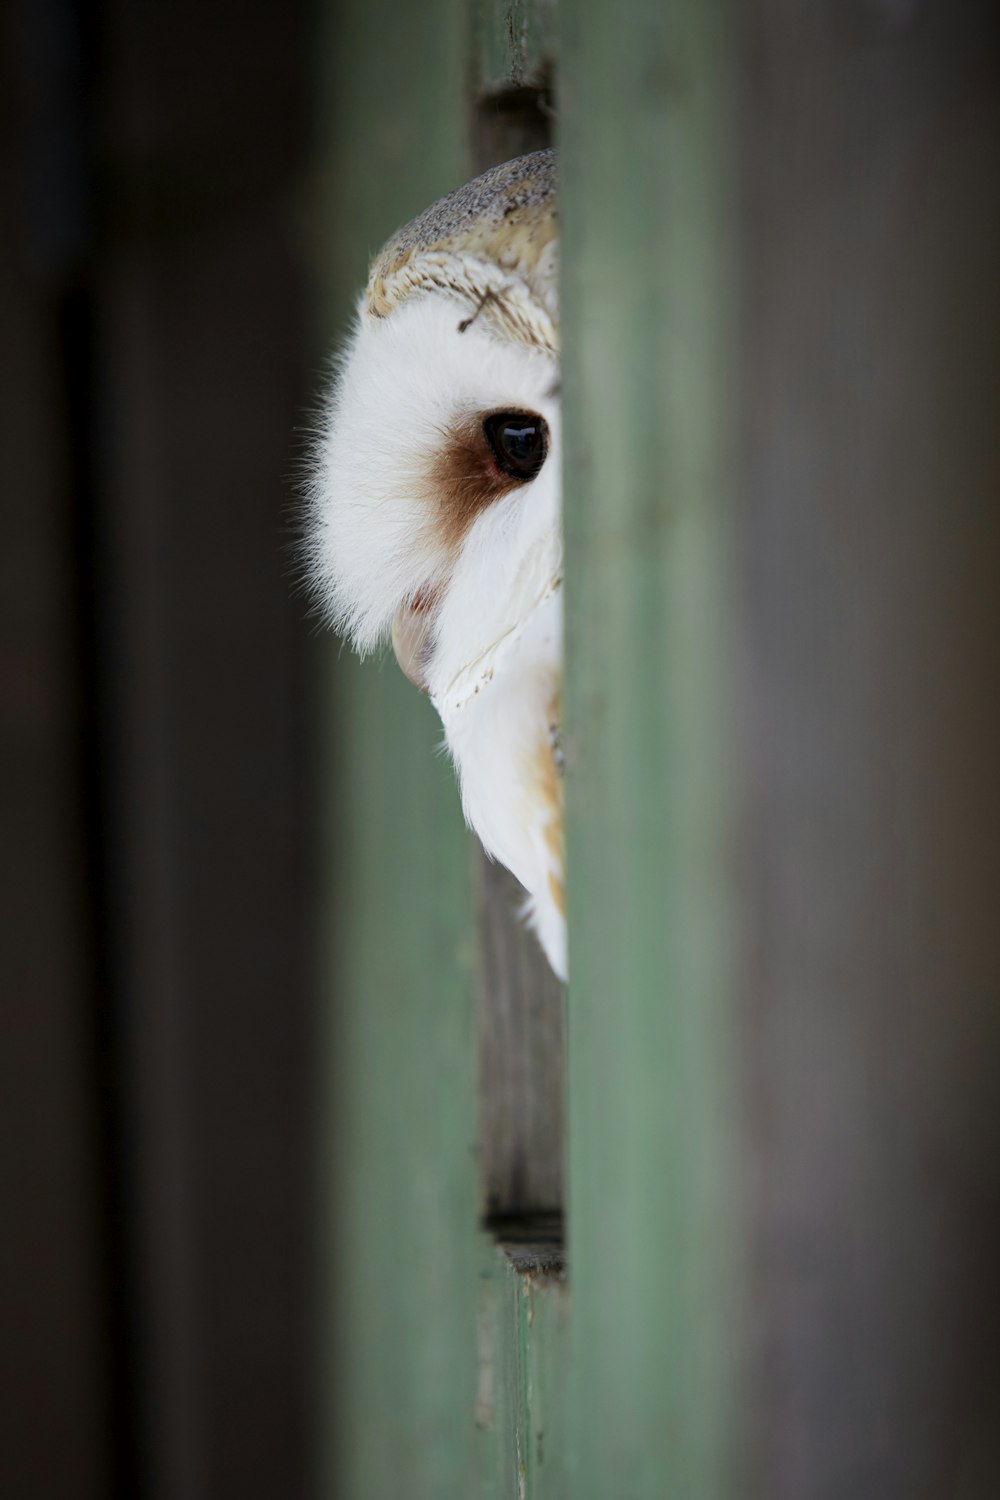 An owl peeking at the camera while sitting in a wall opening.